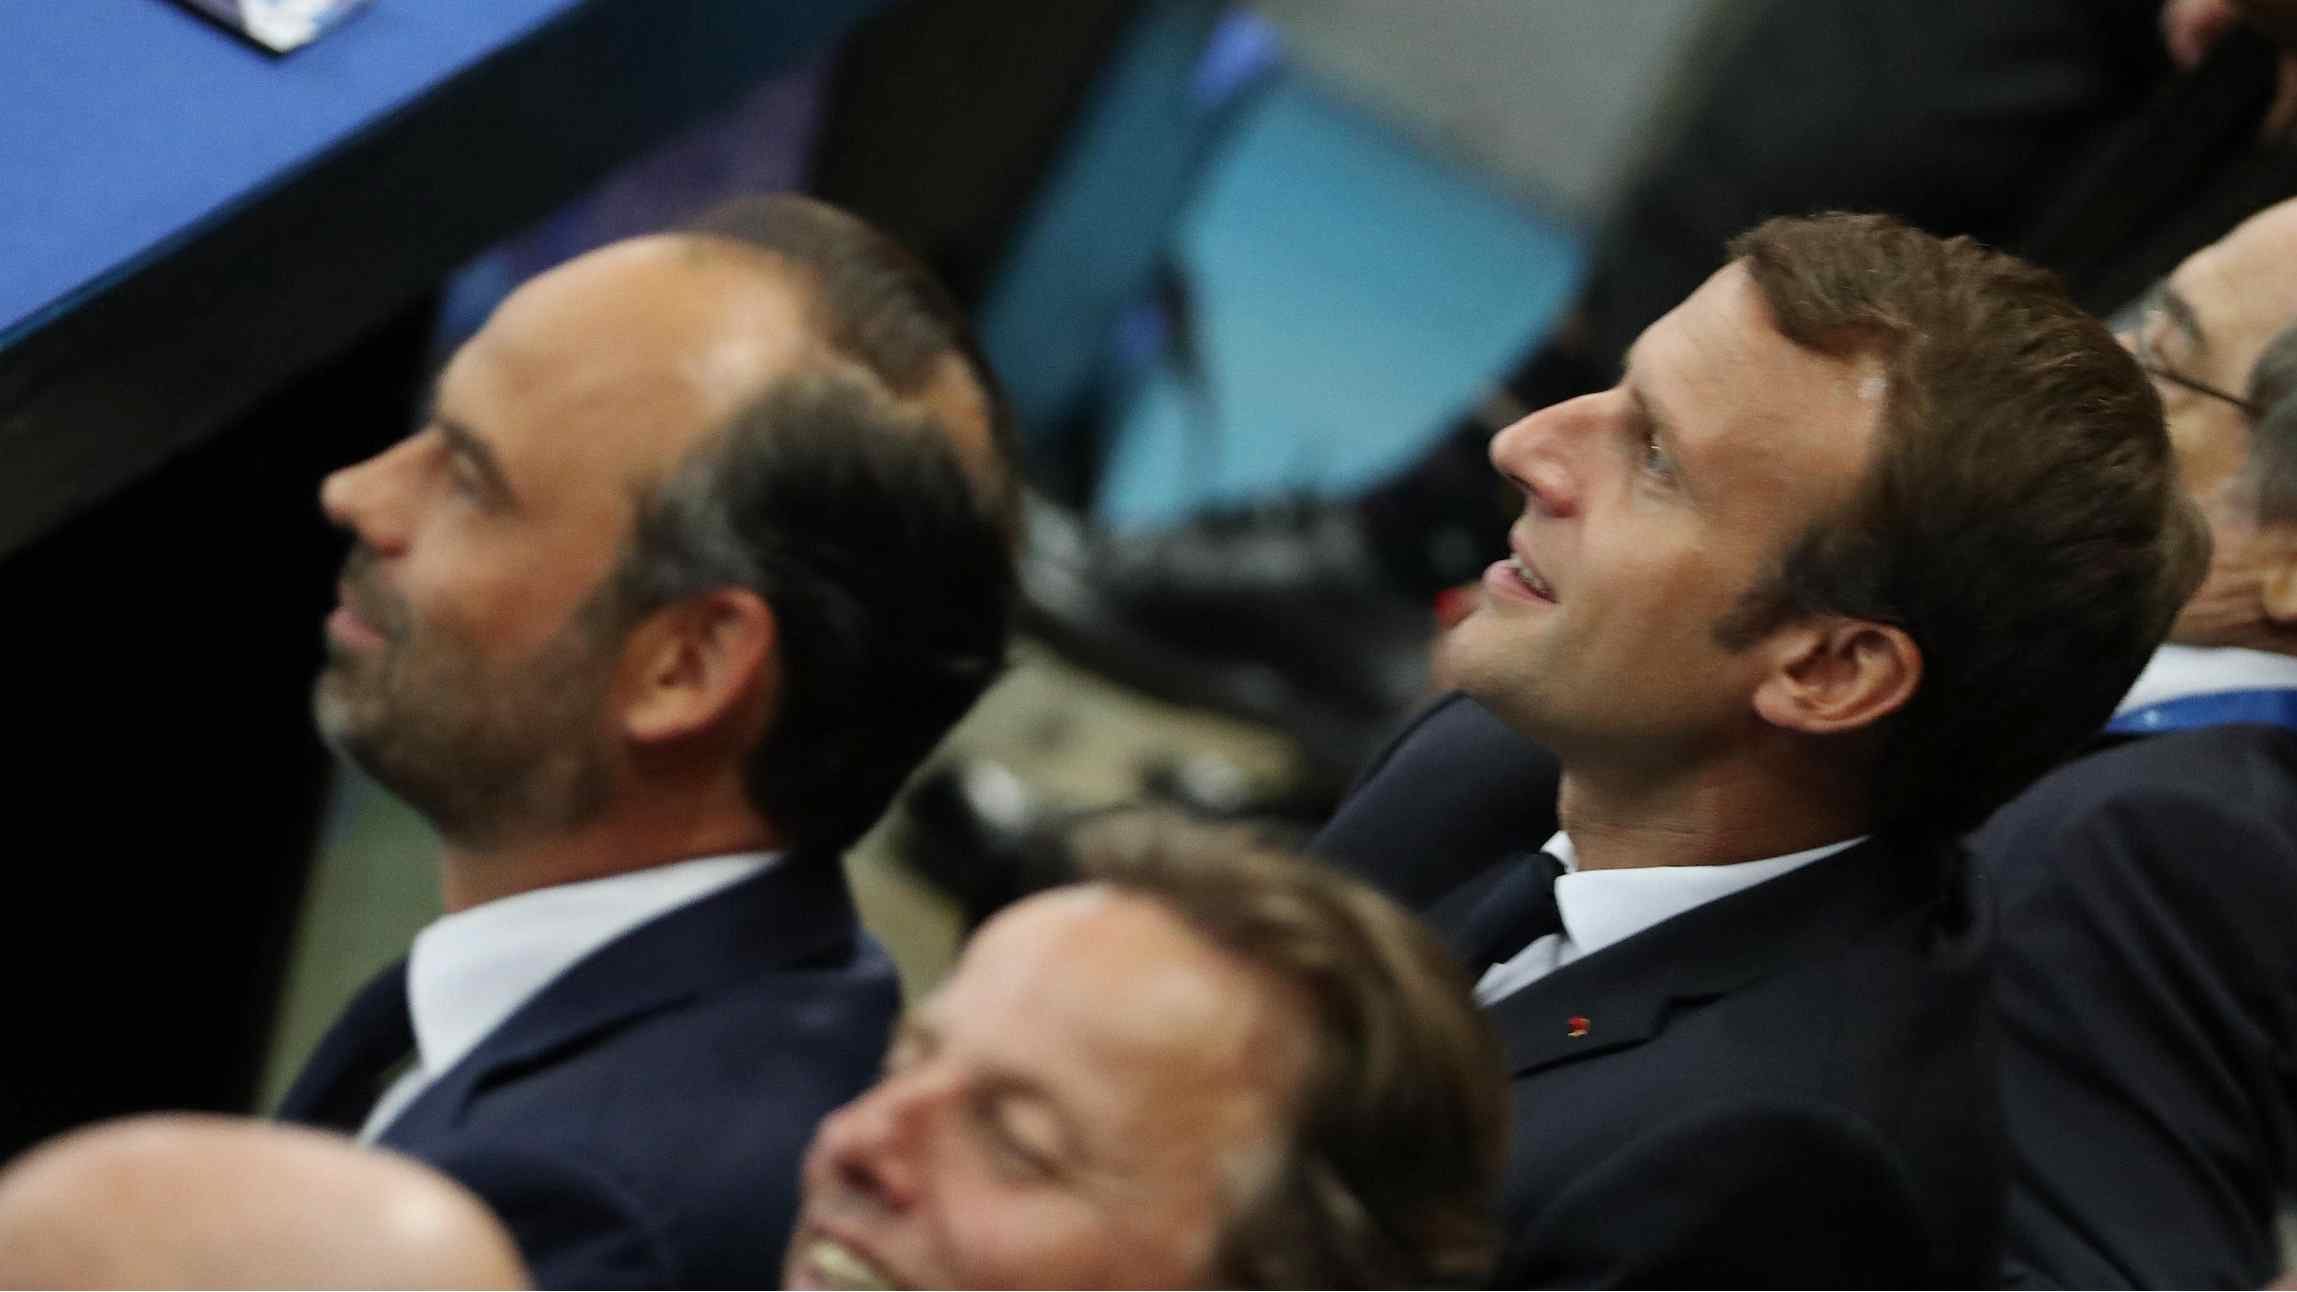 Macron and French Prime Minister Edouard Philippe